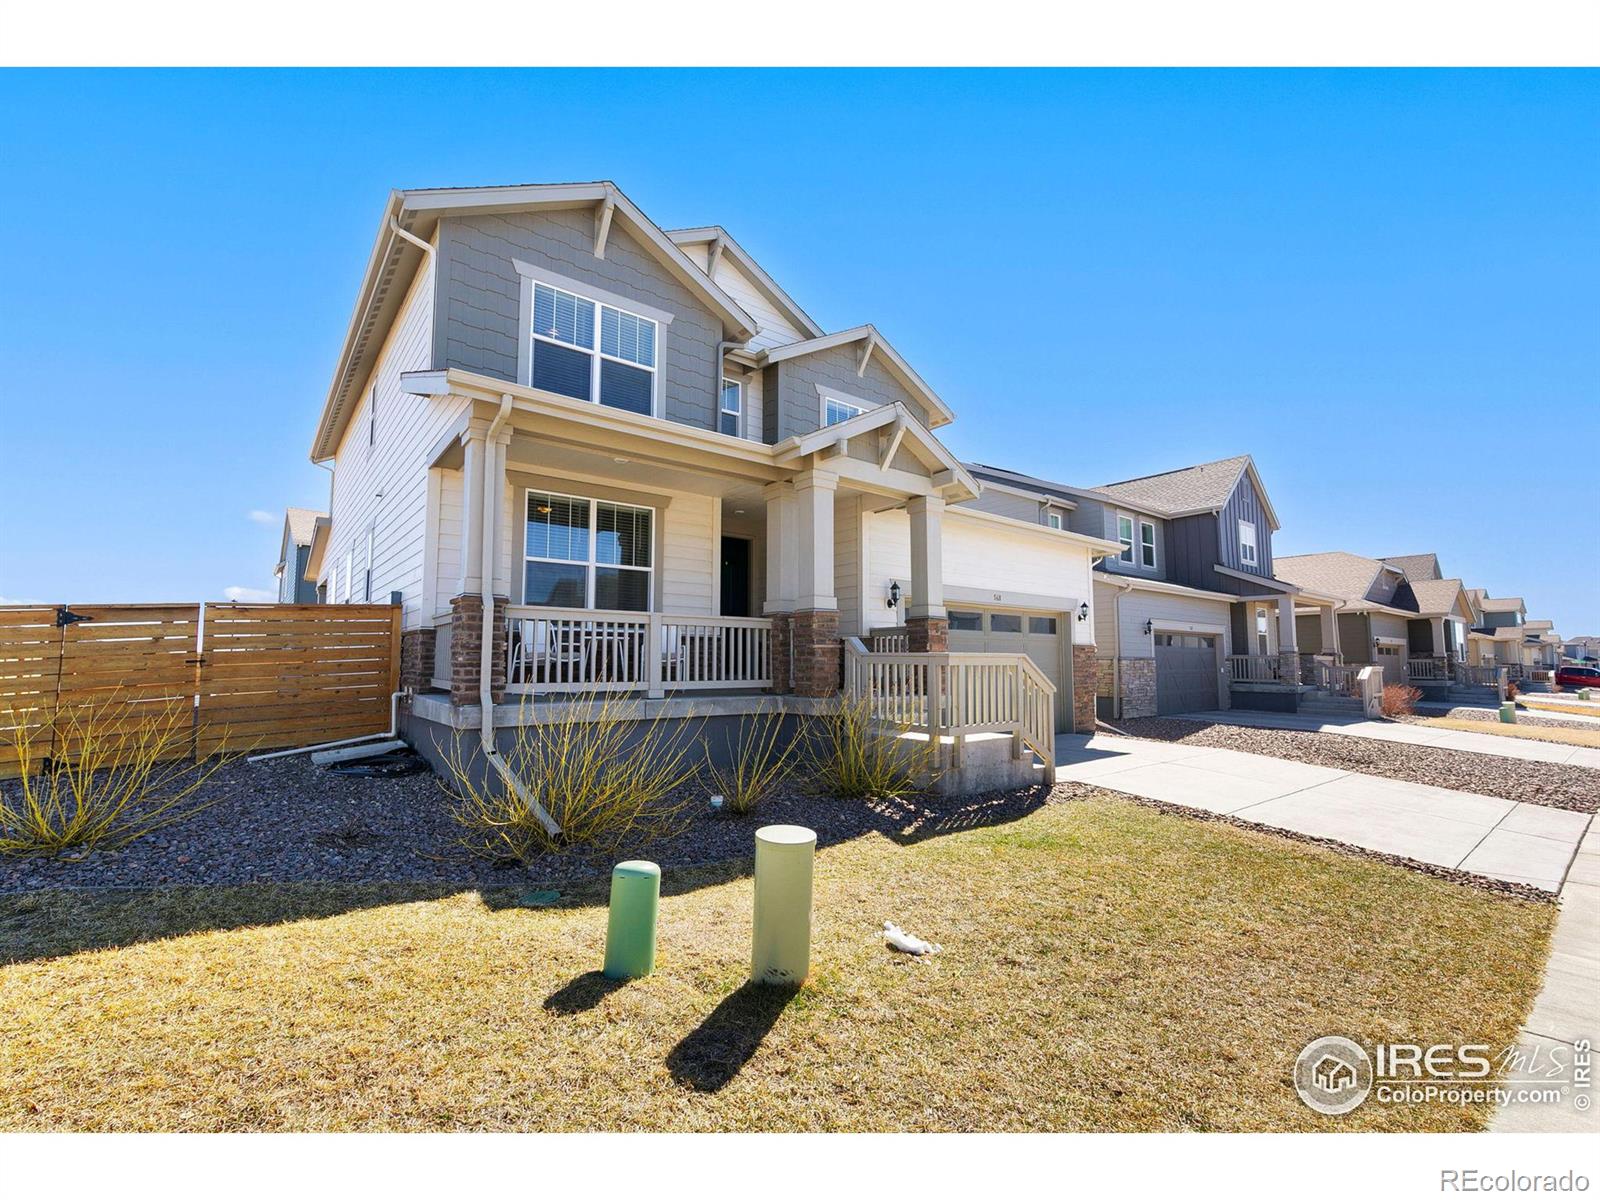 Report Image for 568  Vicot Way,Fort Collins, Colorado